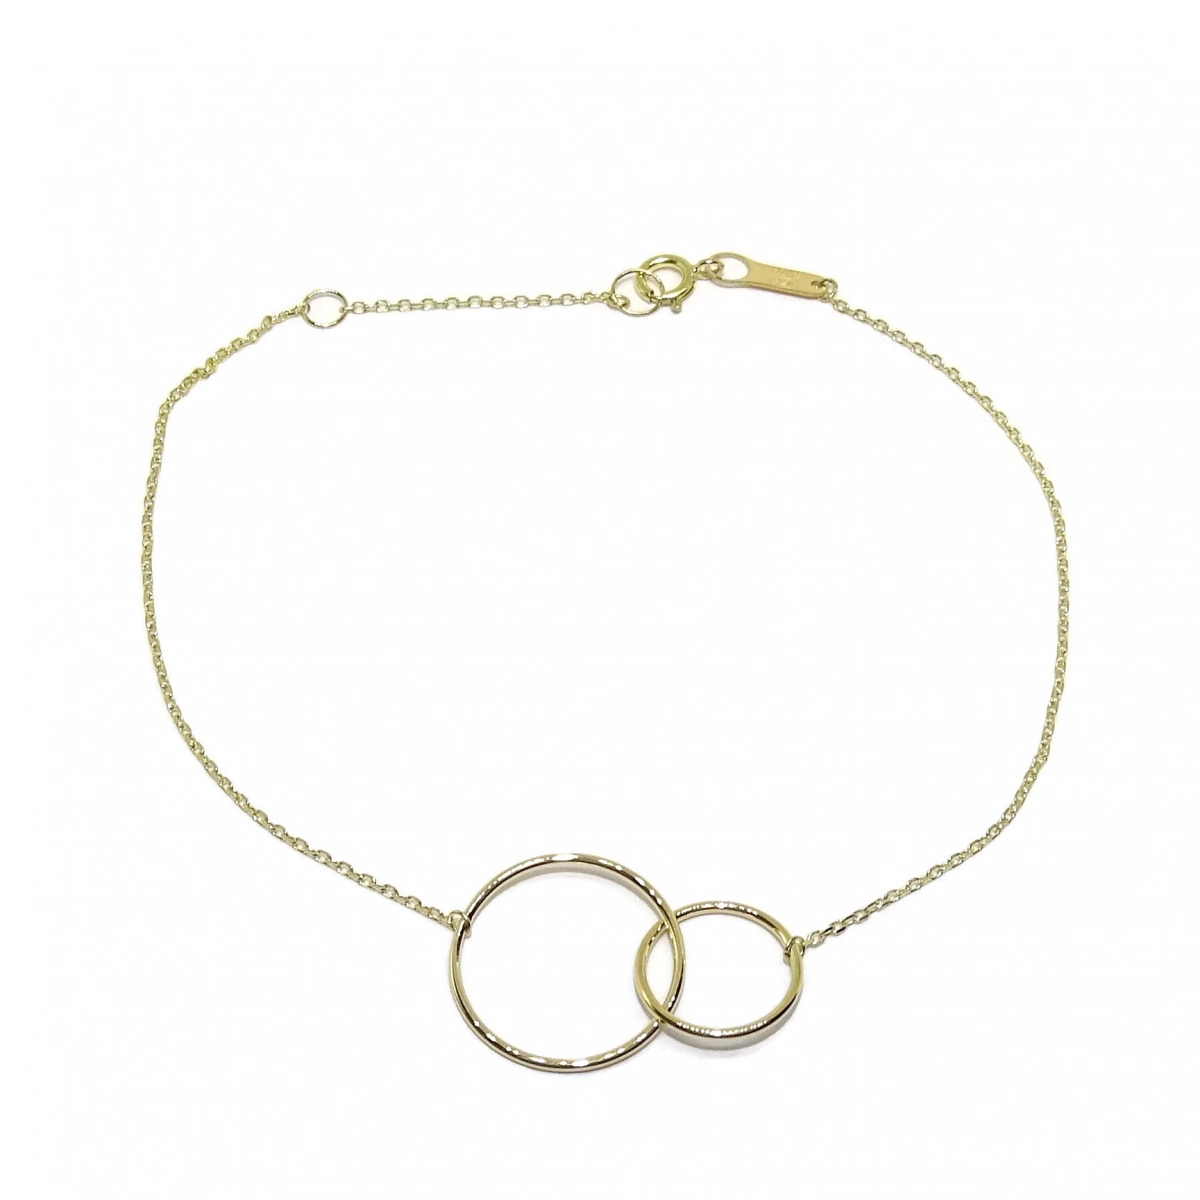 BRACELET OF YELLOW GOLD 18K WITH 2 C�CIRCLES ALWAYS UNITED IN A CL�SICO REINVENTED. NEVER SAY NEVER